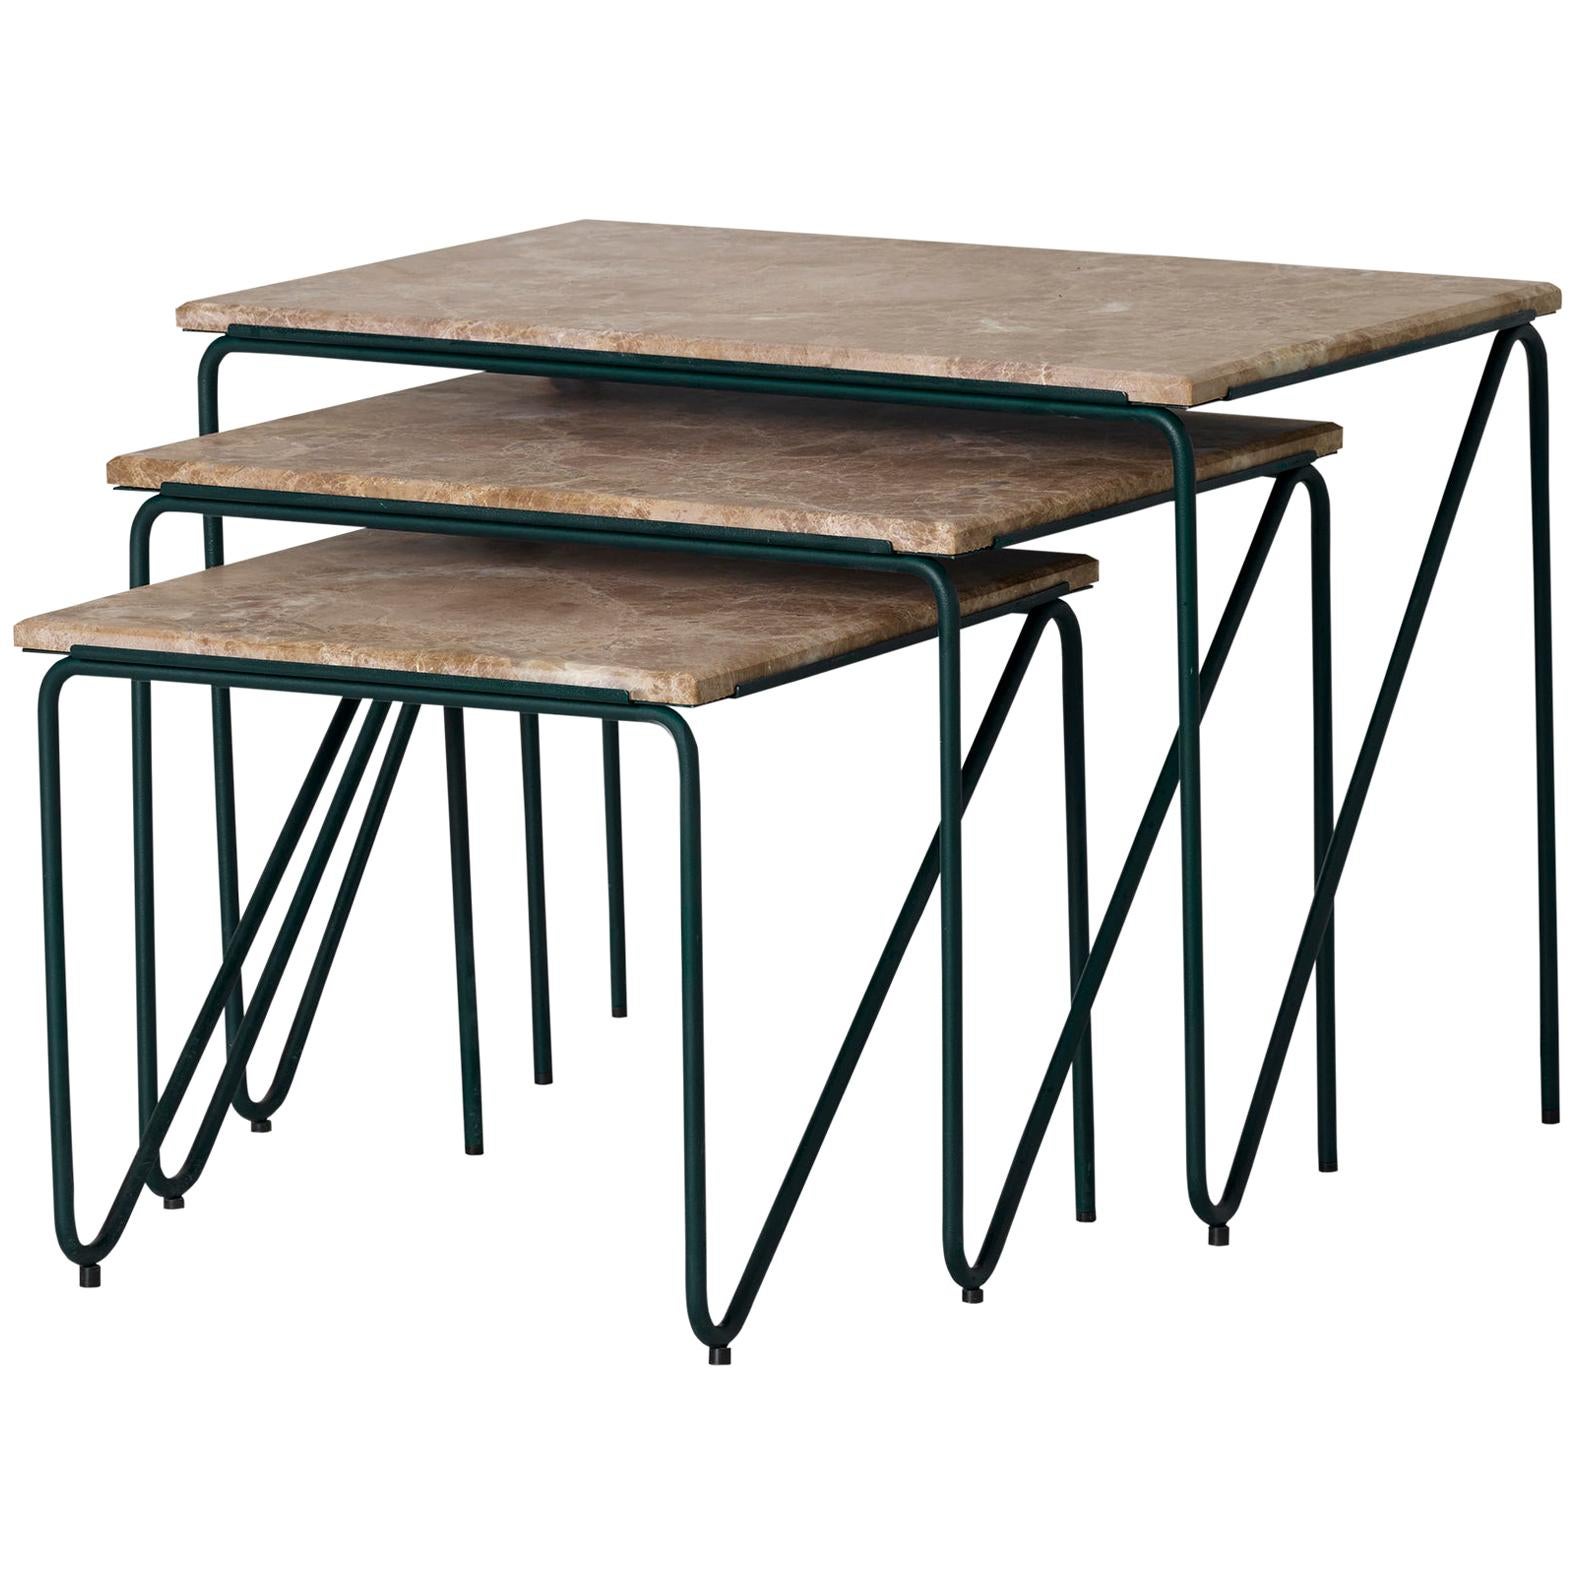 Triptych Nesting Tables in Monaco Brown Marble with Cedar Green Frame